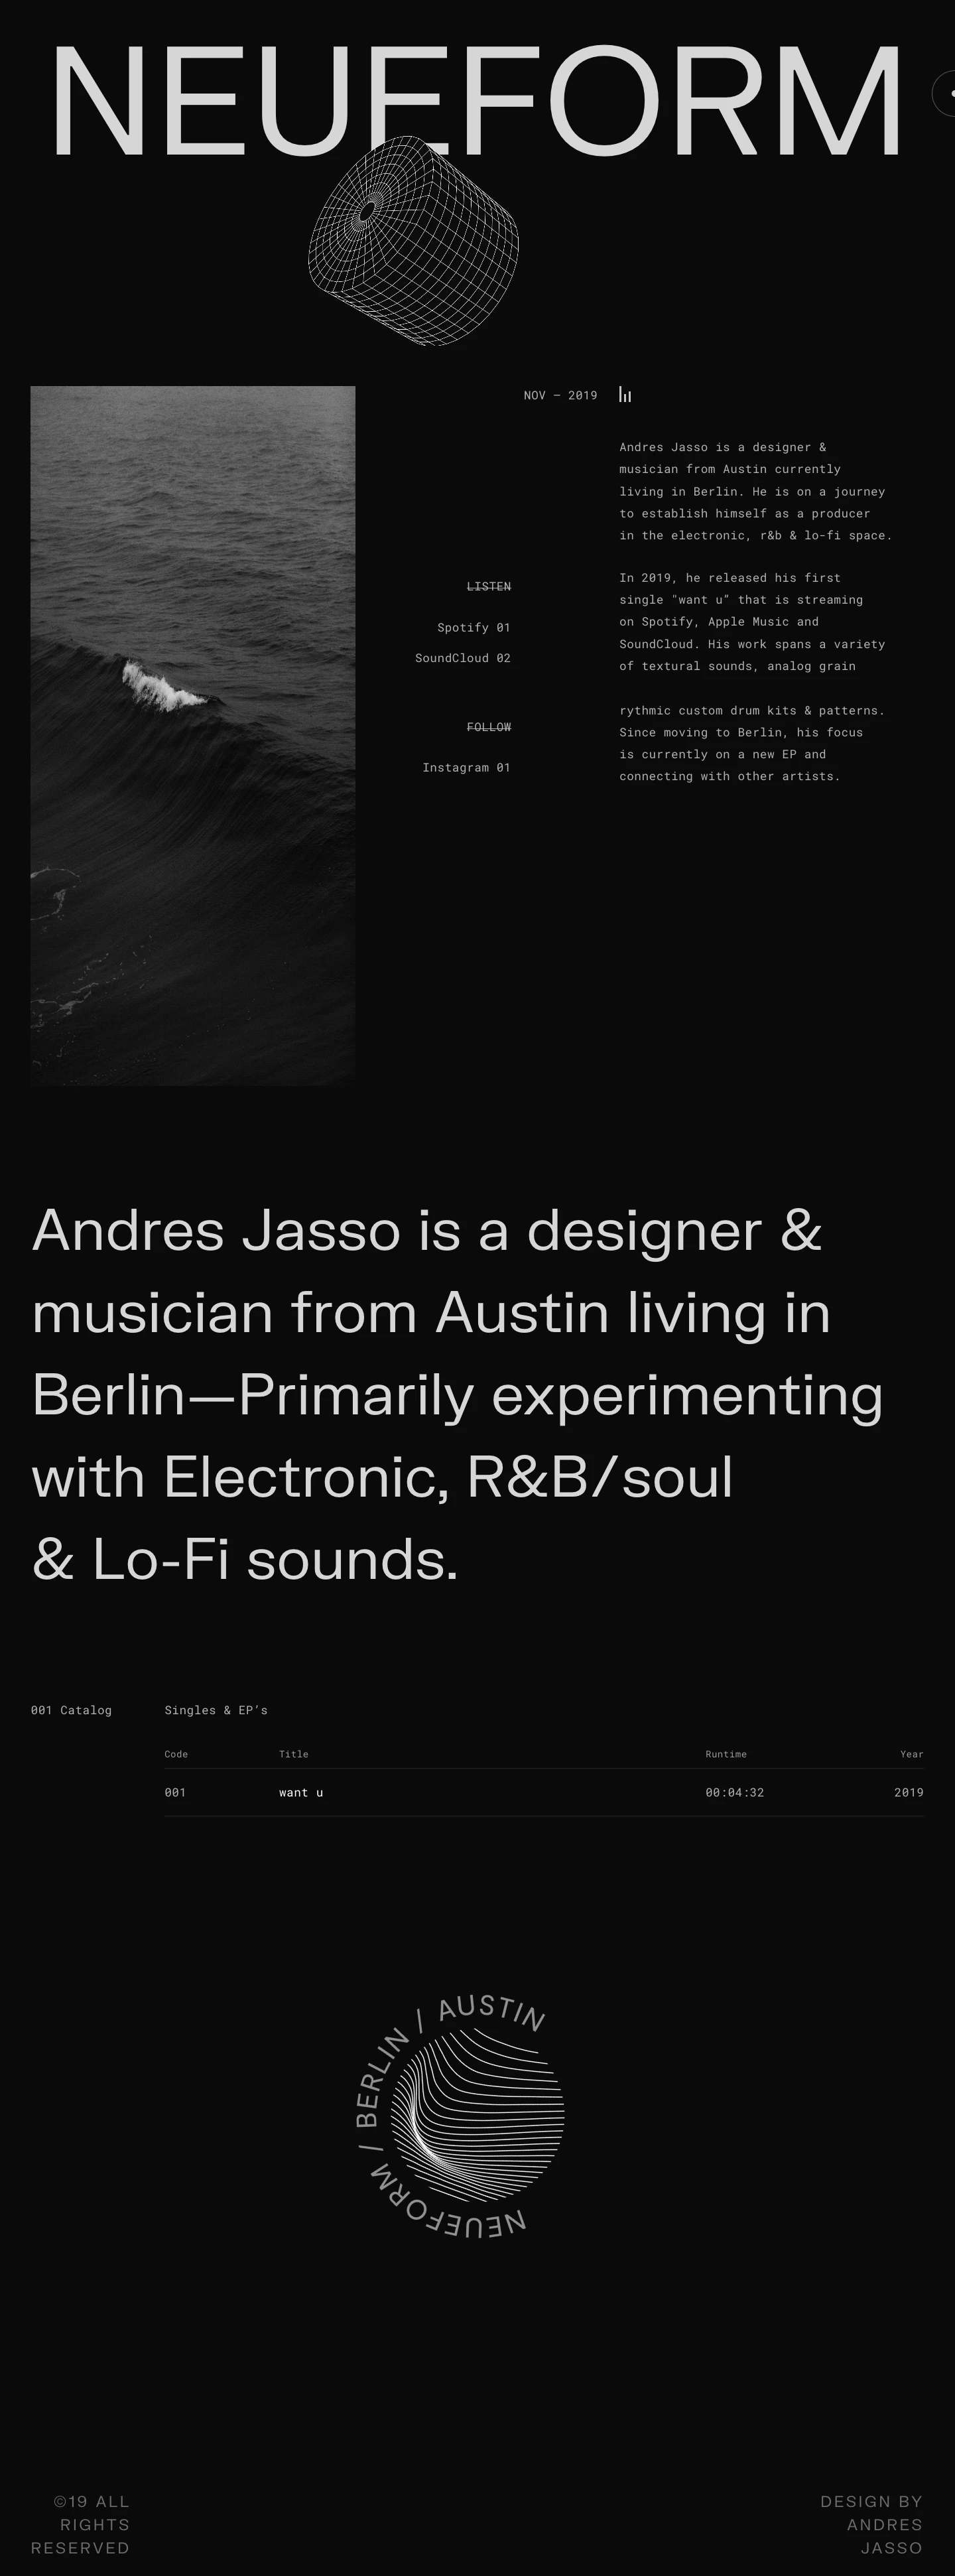 neueform Landing Page Example: Andres Jasso is a designer & musician from Austin living in Berlin. Primarily experimenting with Electronic, R&B/soul & Lo-Fi sounds.